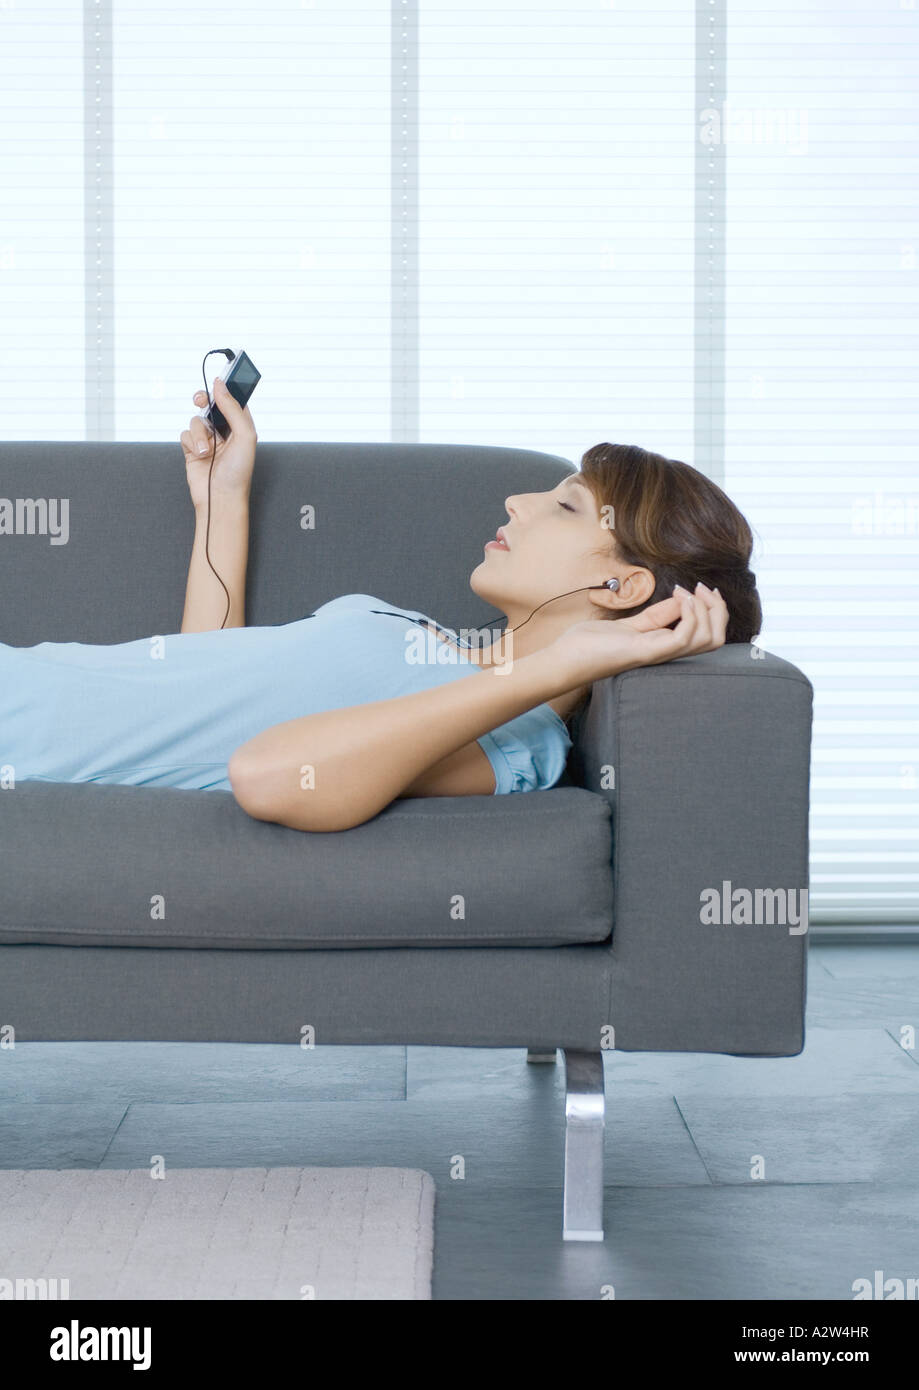 Young woman lying on sofa, listening to portable MP3 player Stock Photo